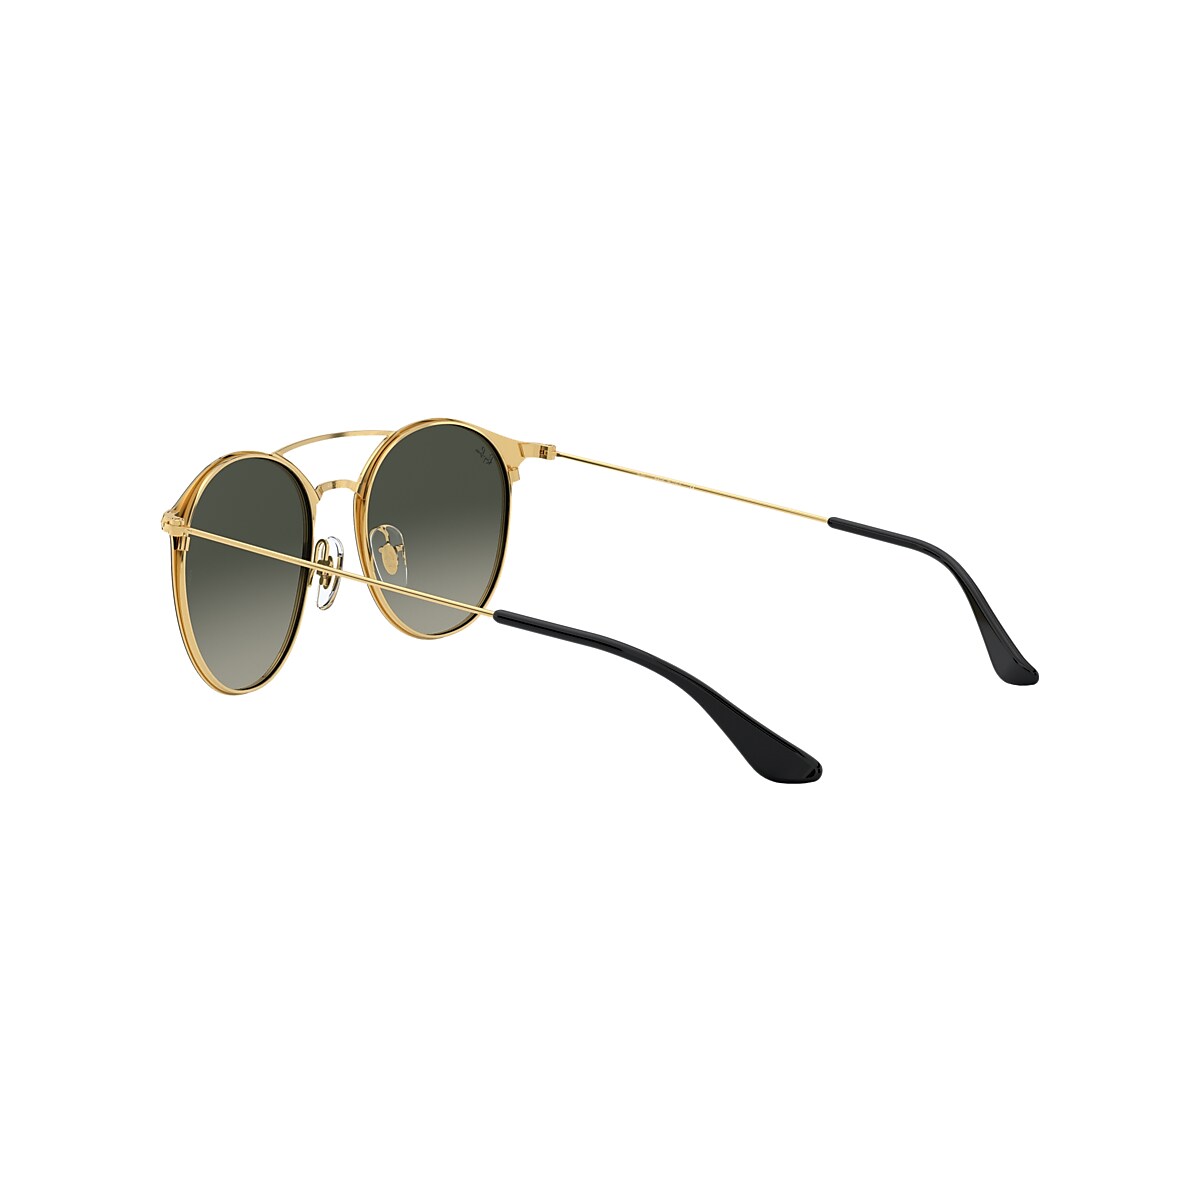 RB3546 Sunglasses in Black On Gold and Grey - RB3546 | Ray-Ban